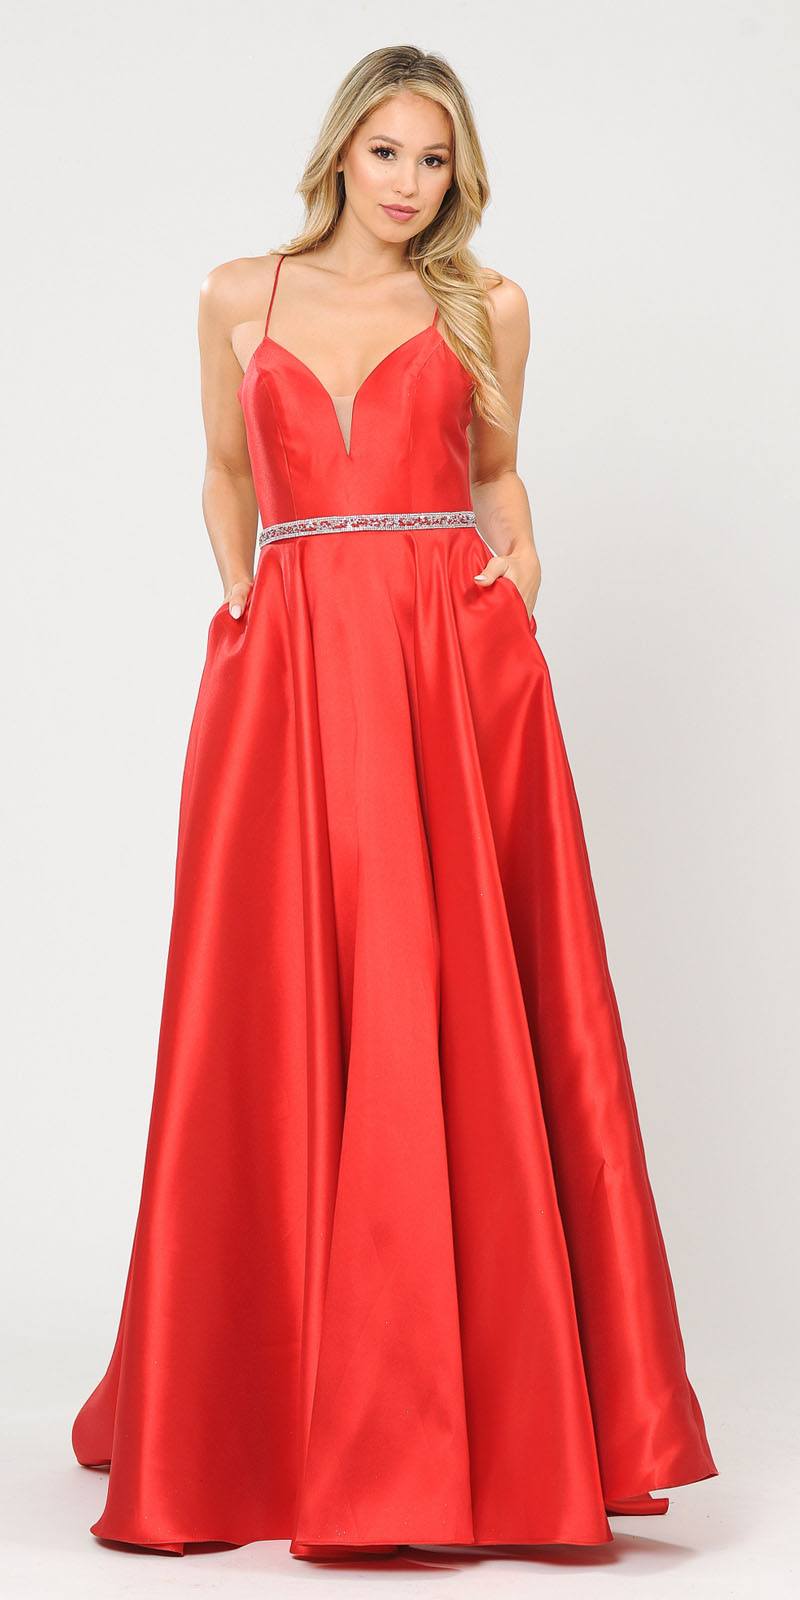 Poly USA 8688 Halter Criss-Cross Back Long Red Prom Dress with Pockets